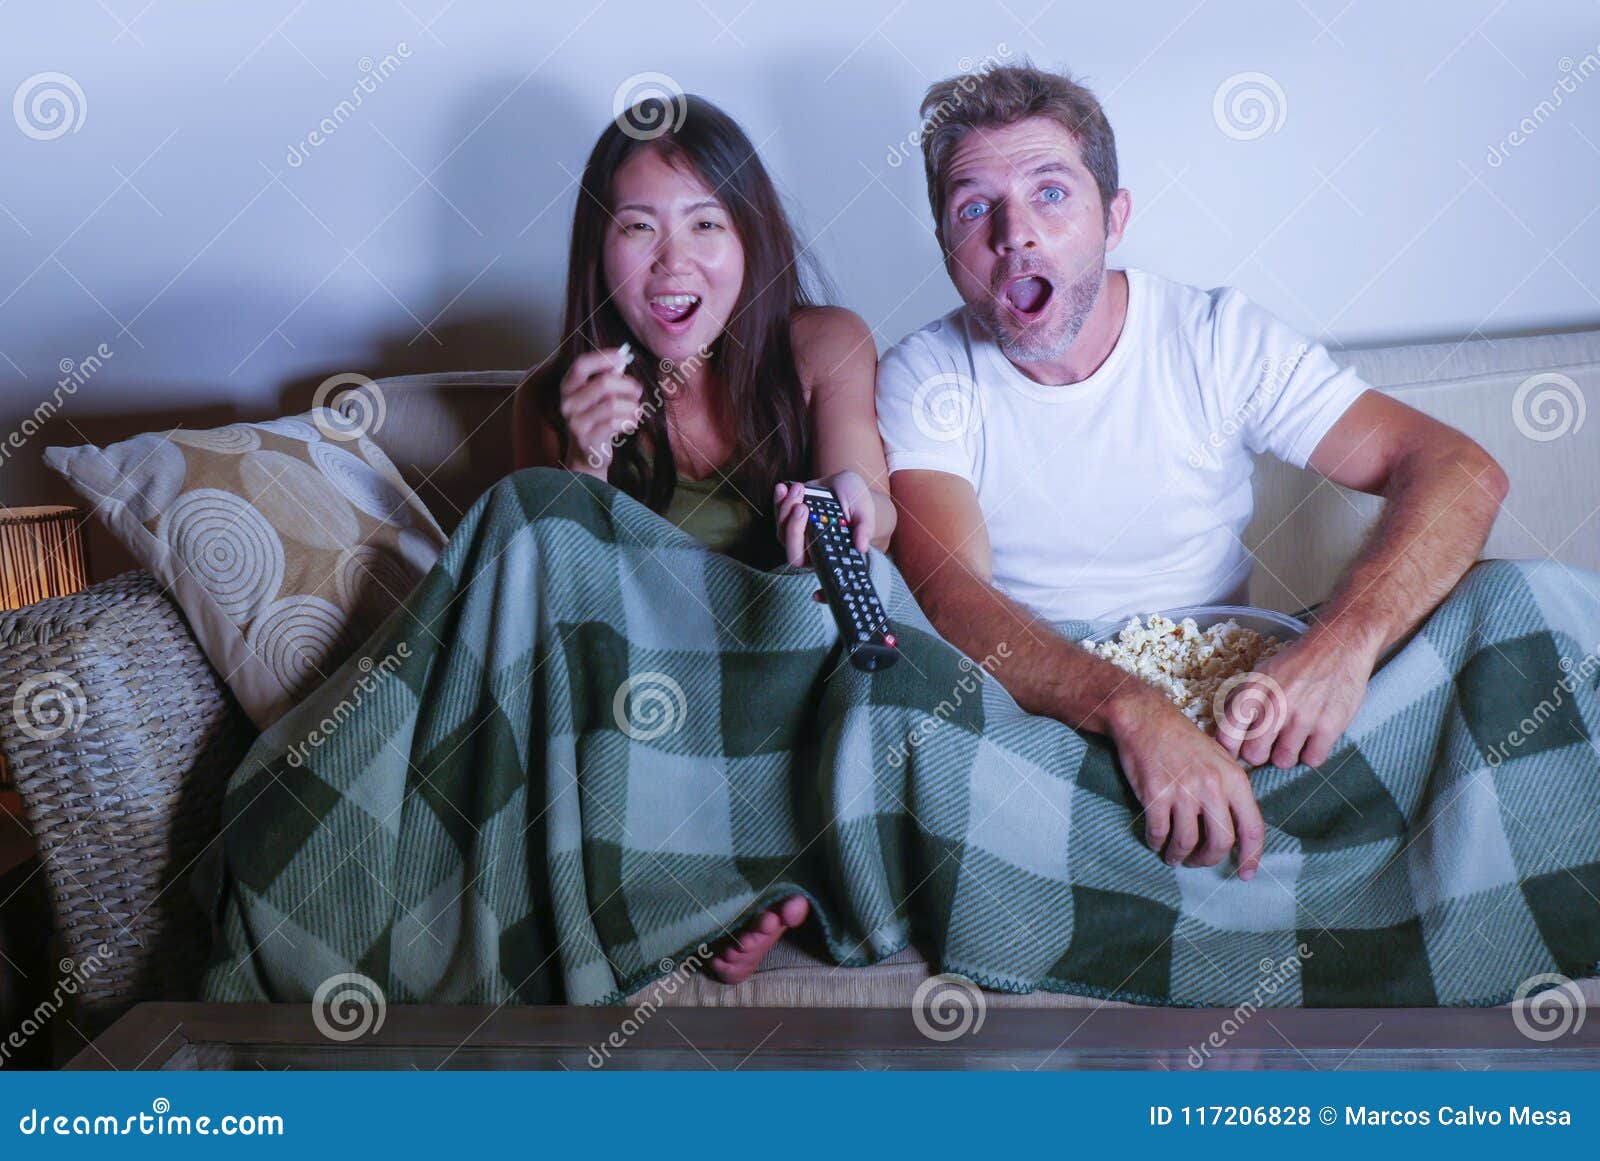 Young Mixed Race Attractive Couple With Asian Korean Woman And Wh